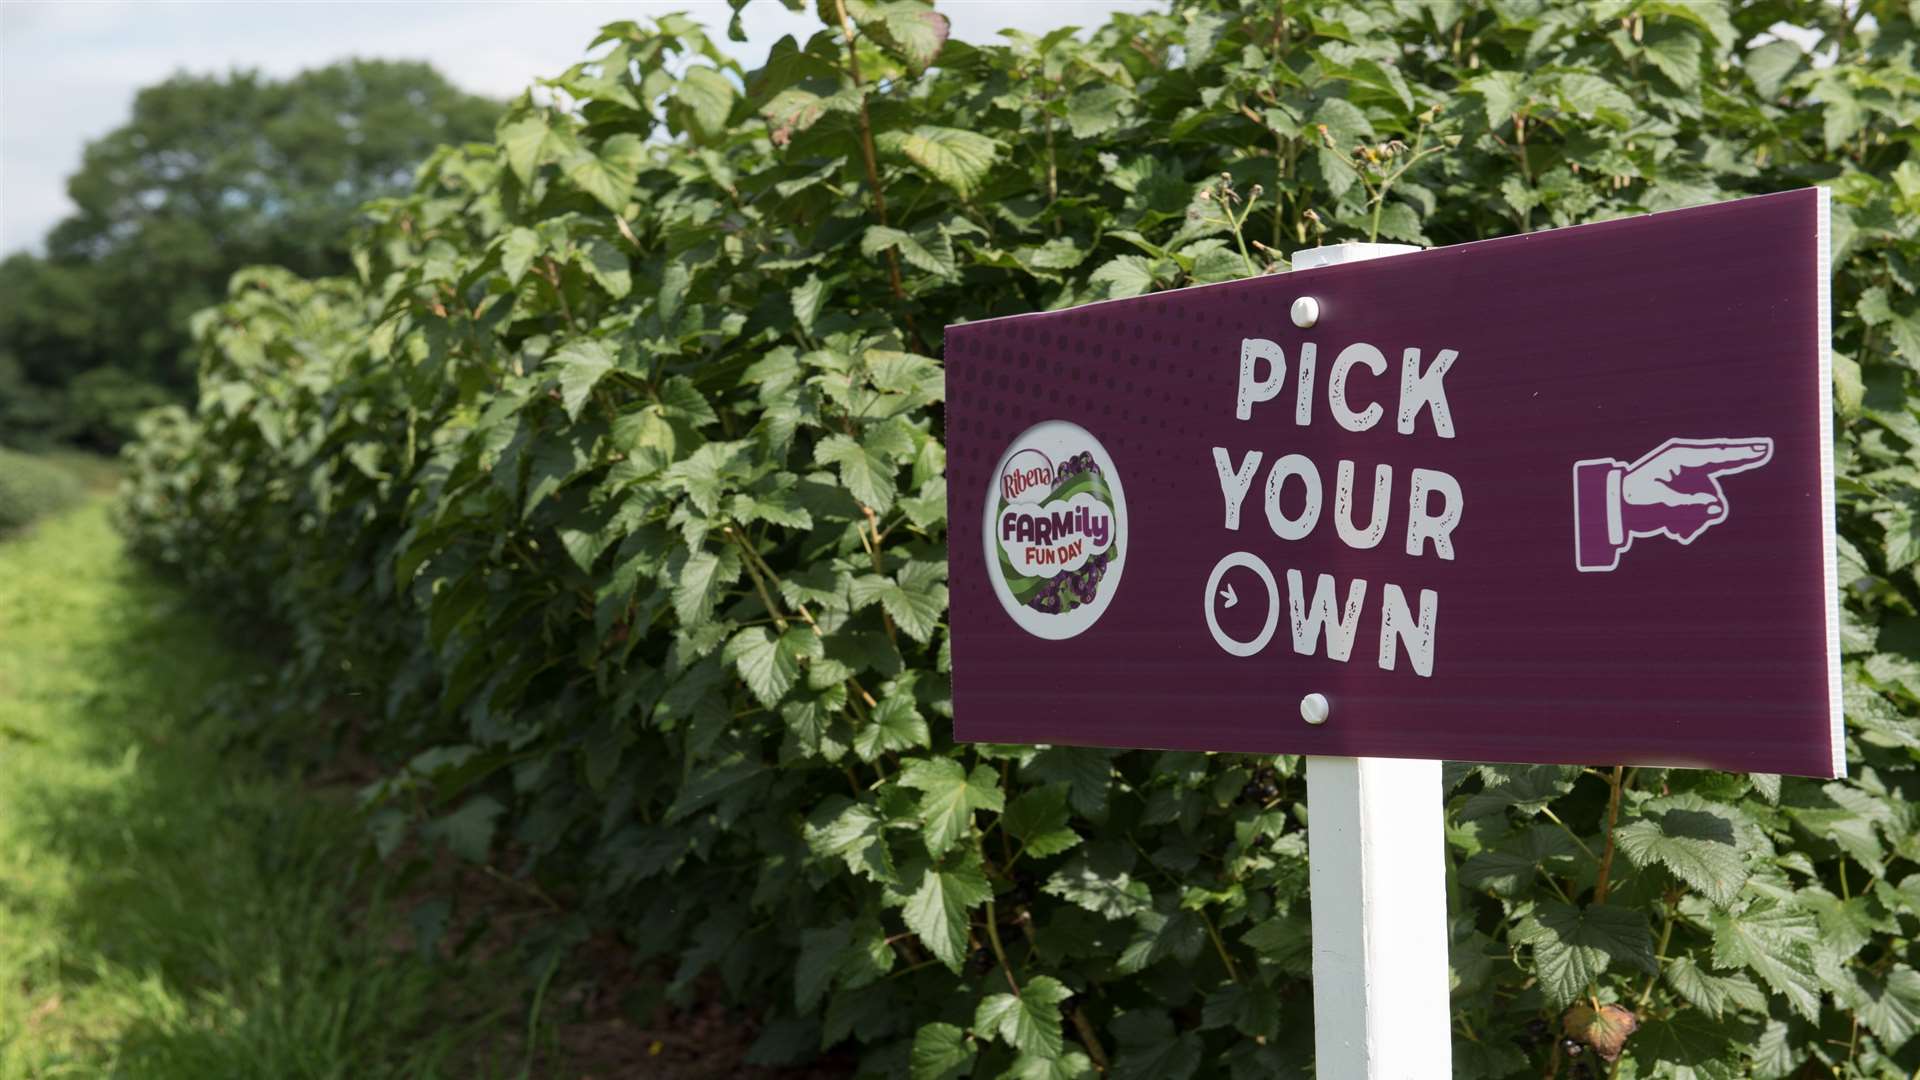 Pick your own Ribena blackcurrants at a special open day